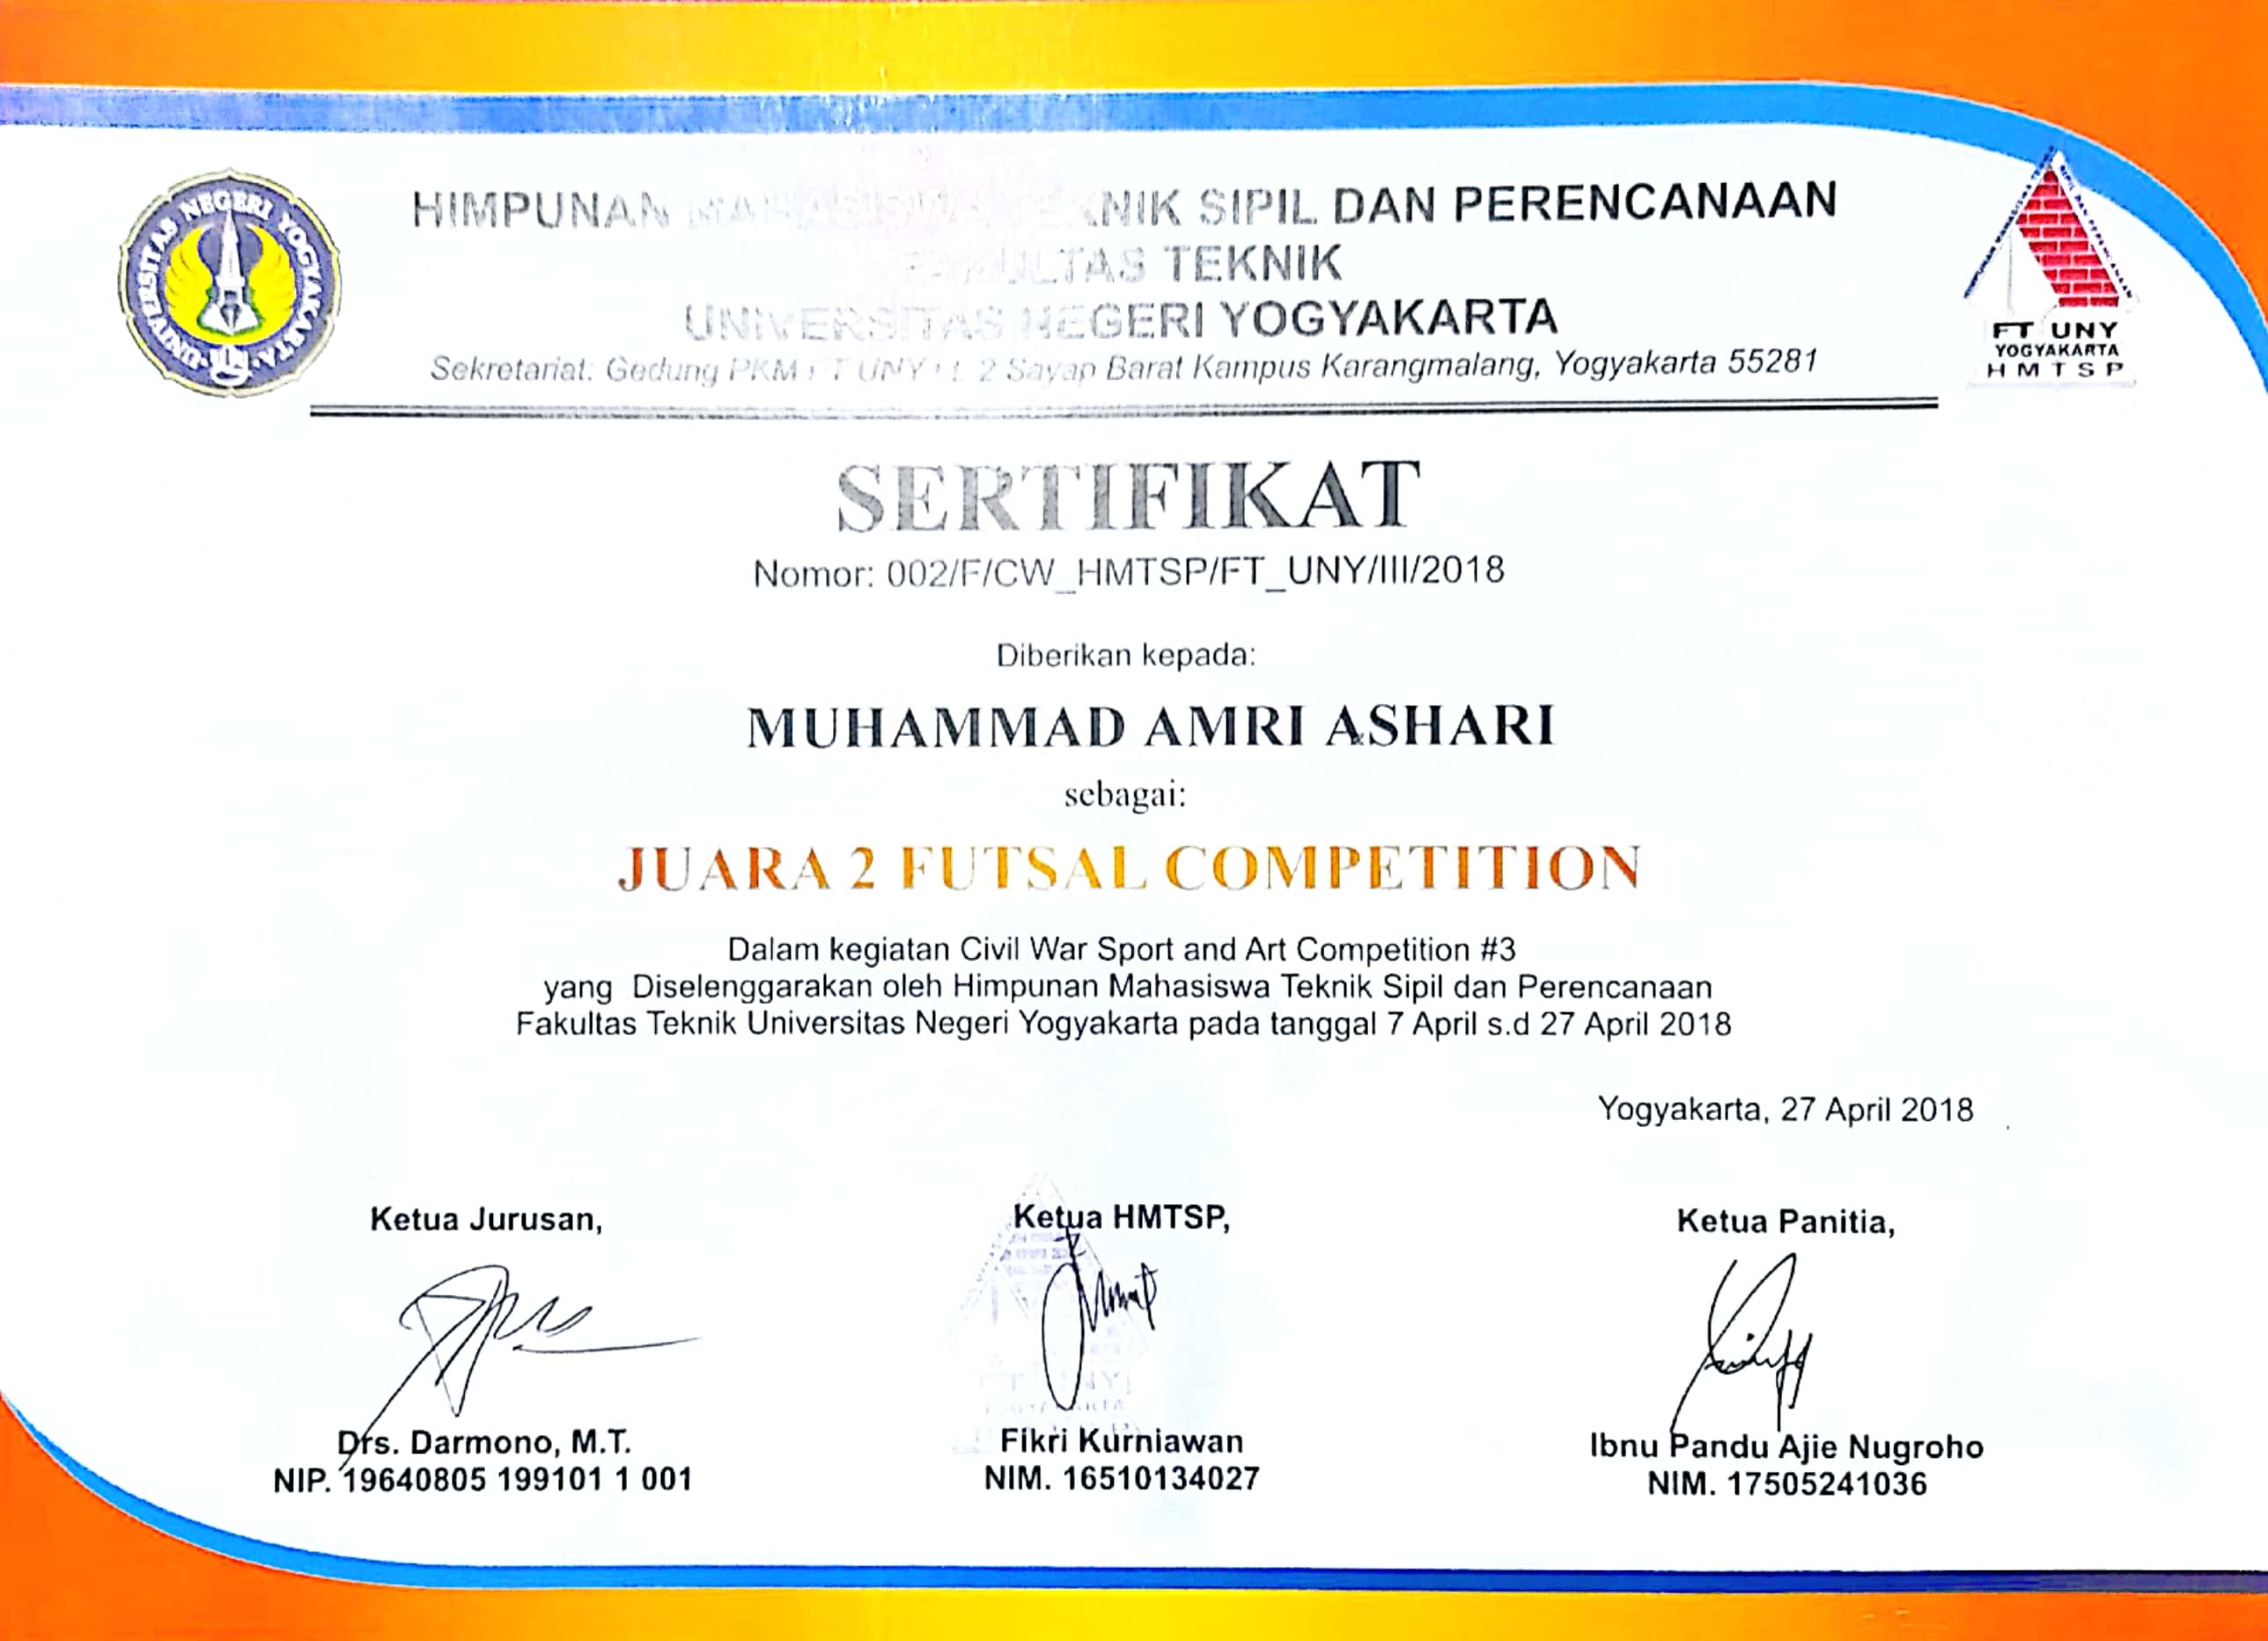 Foto Civil War Sport and Art Competition#3